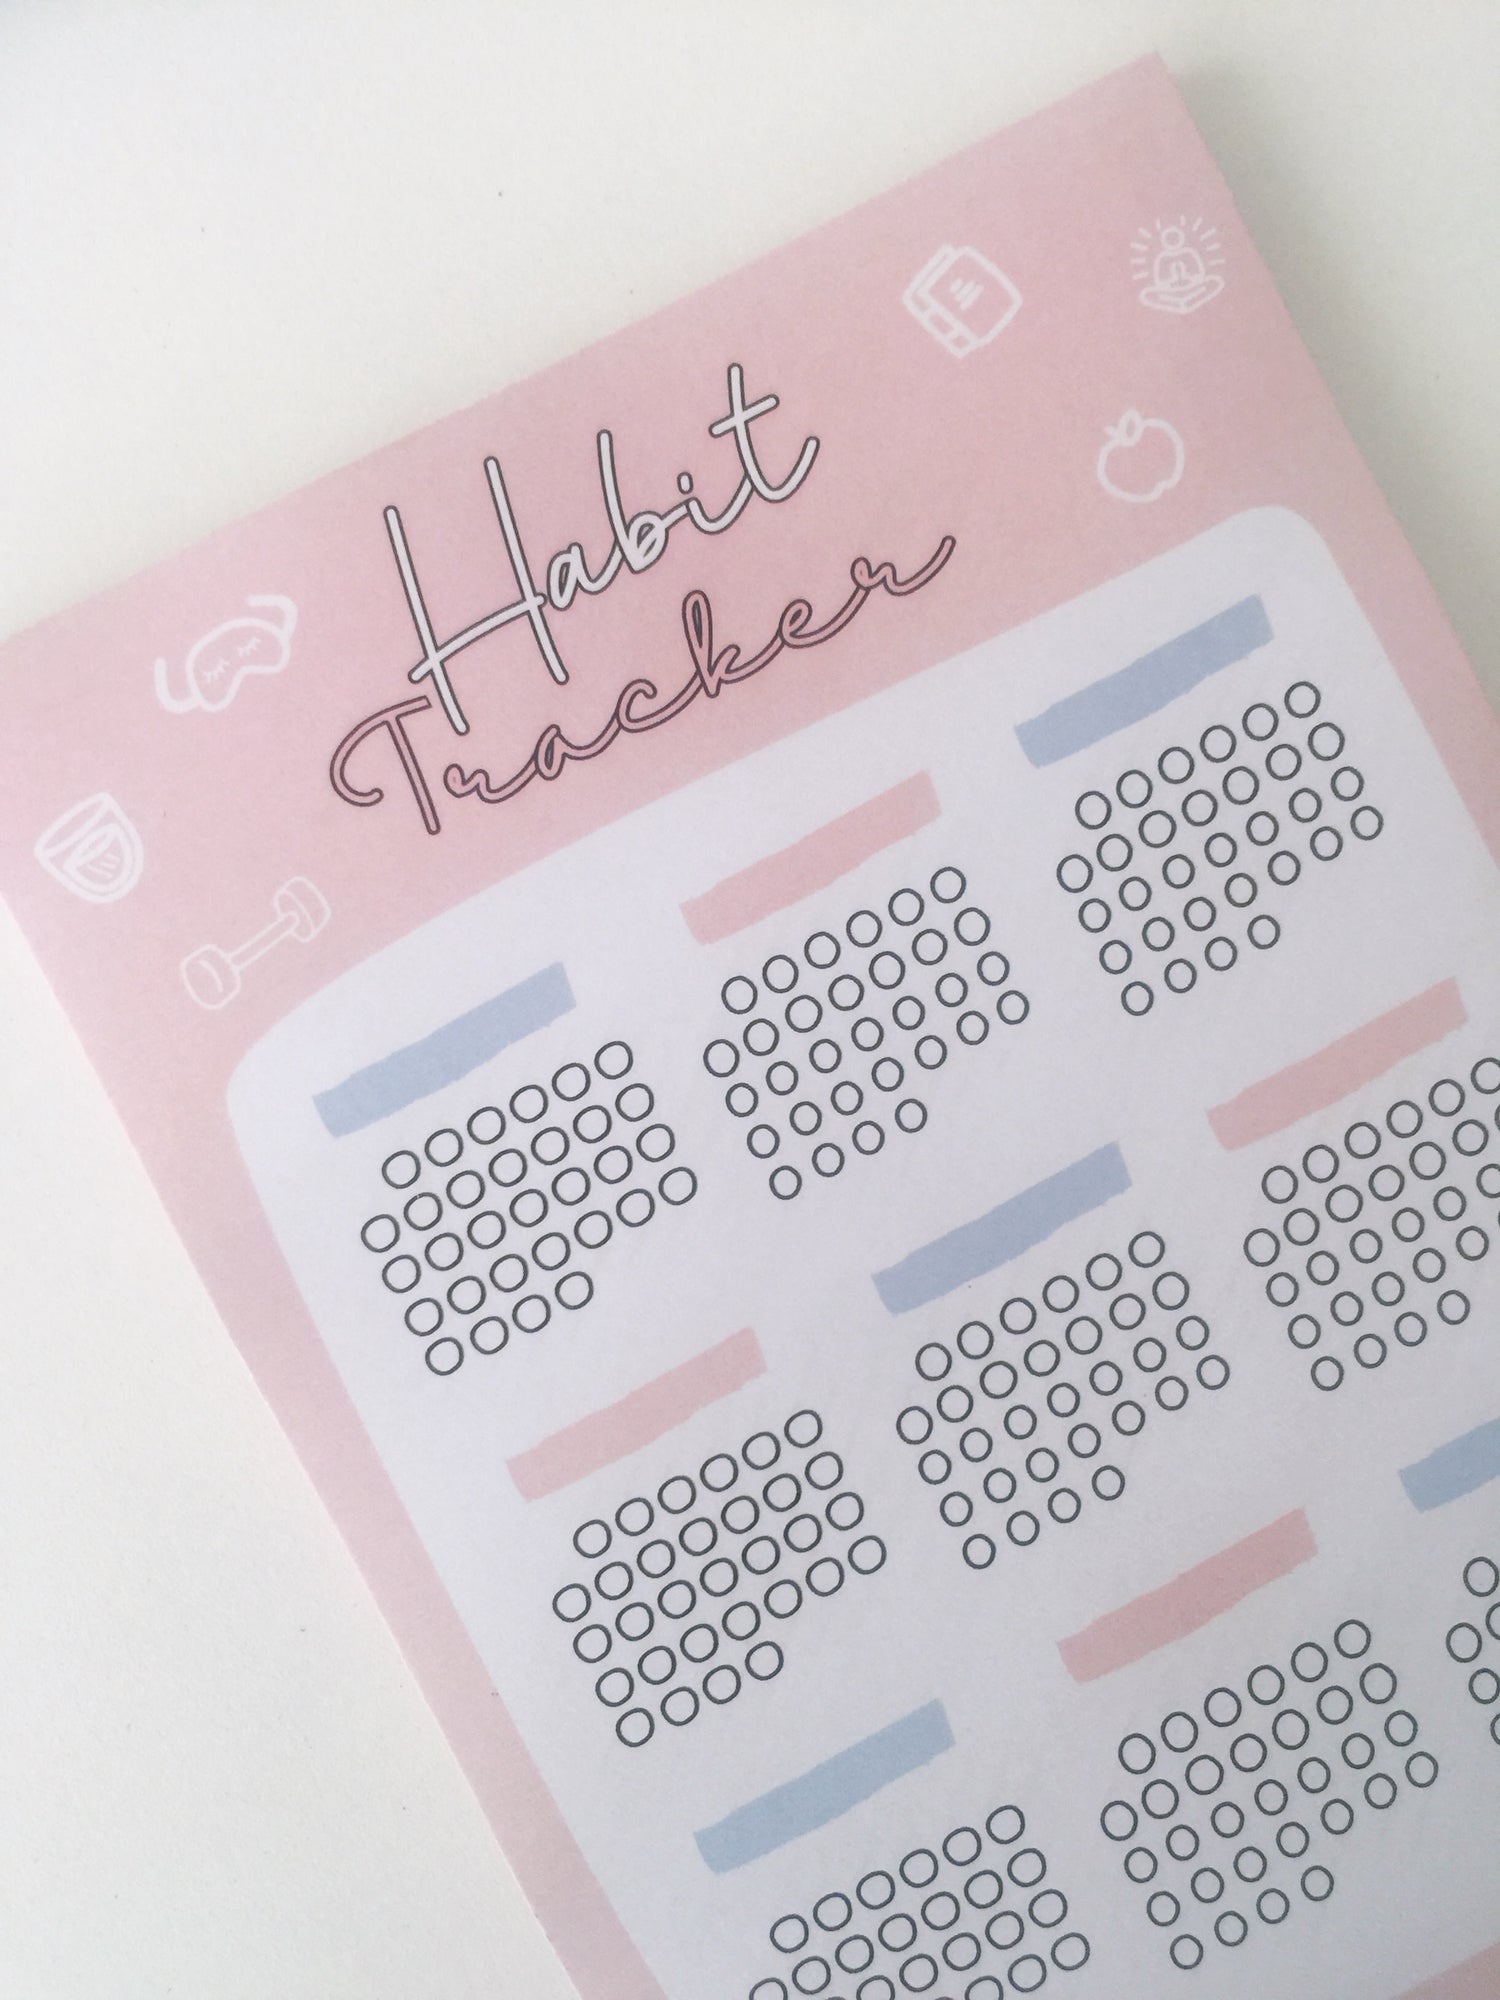 Self Care Habit Tracker | A5 size | 50 sheets - Supple Room